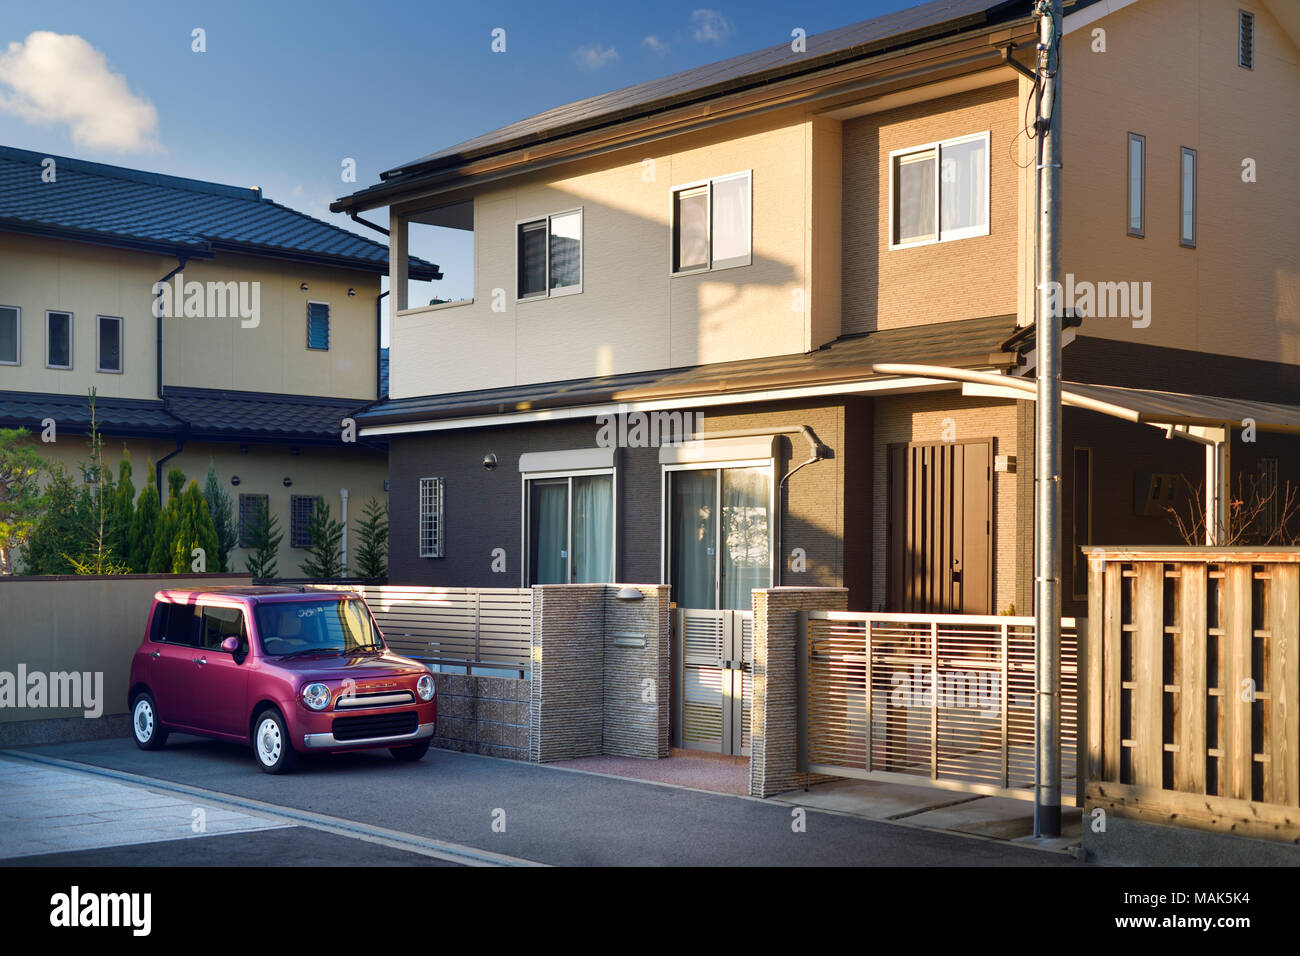 Modern Japanese private residential house exterior with a small car Suzuki Lapin parked on the driveway. Uji, Kyoto prefecture, Japan 2017. Stock Photo